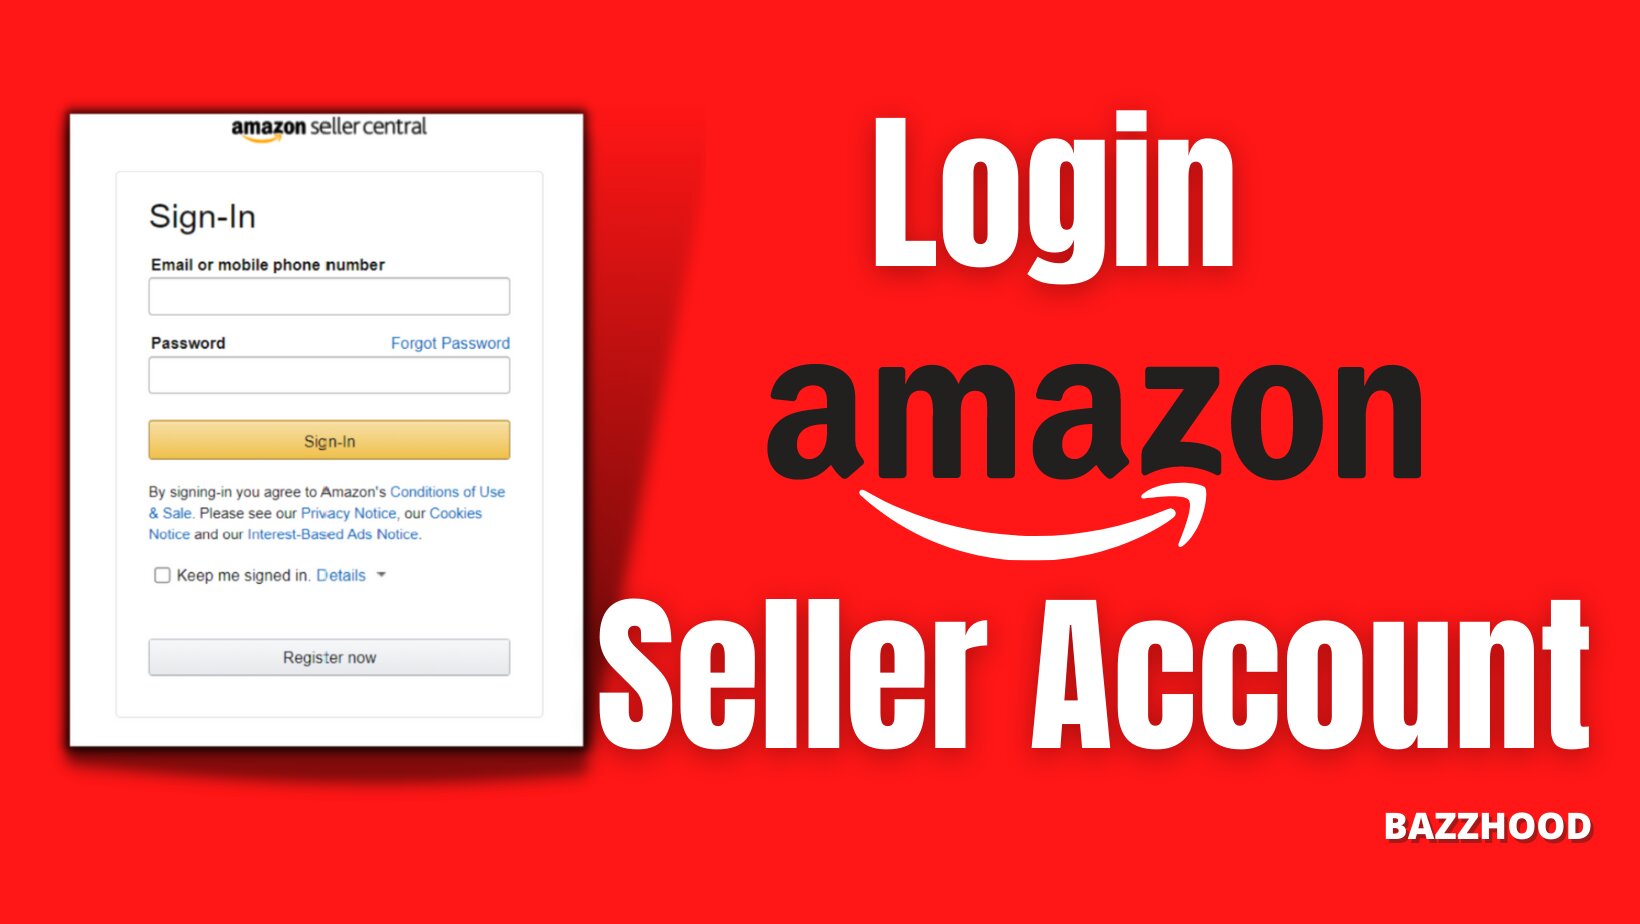 How to login Amazon Seller Account